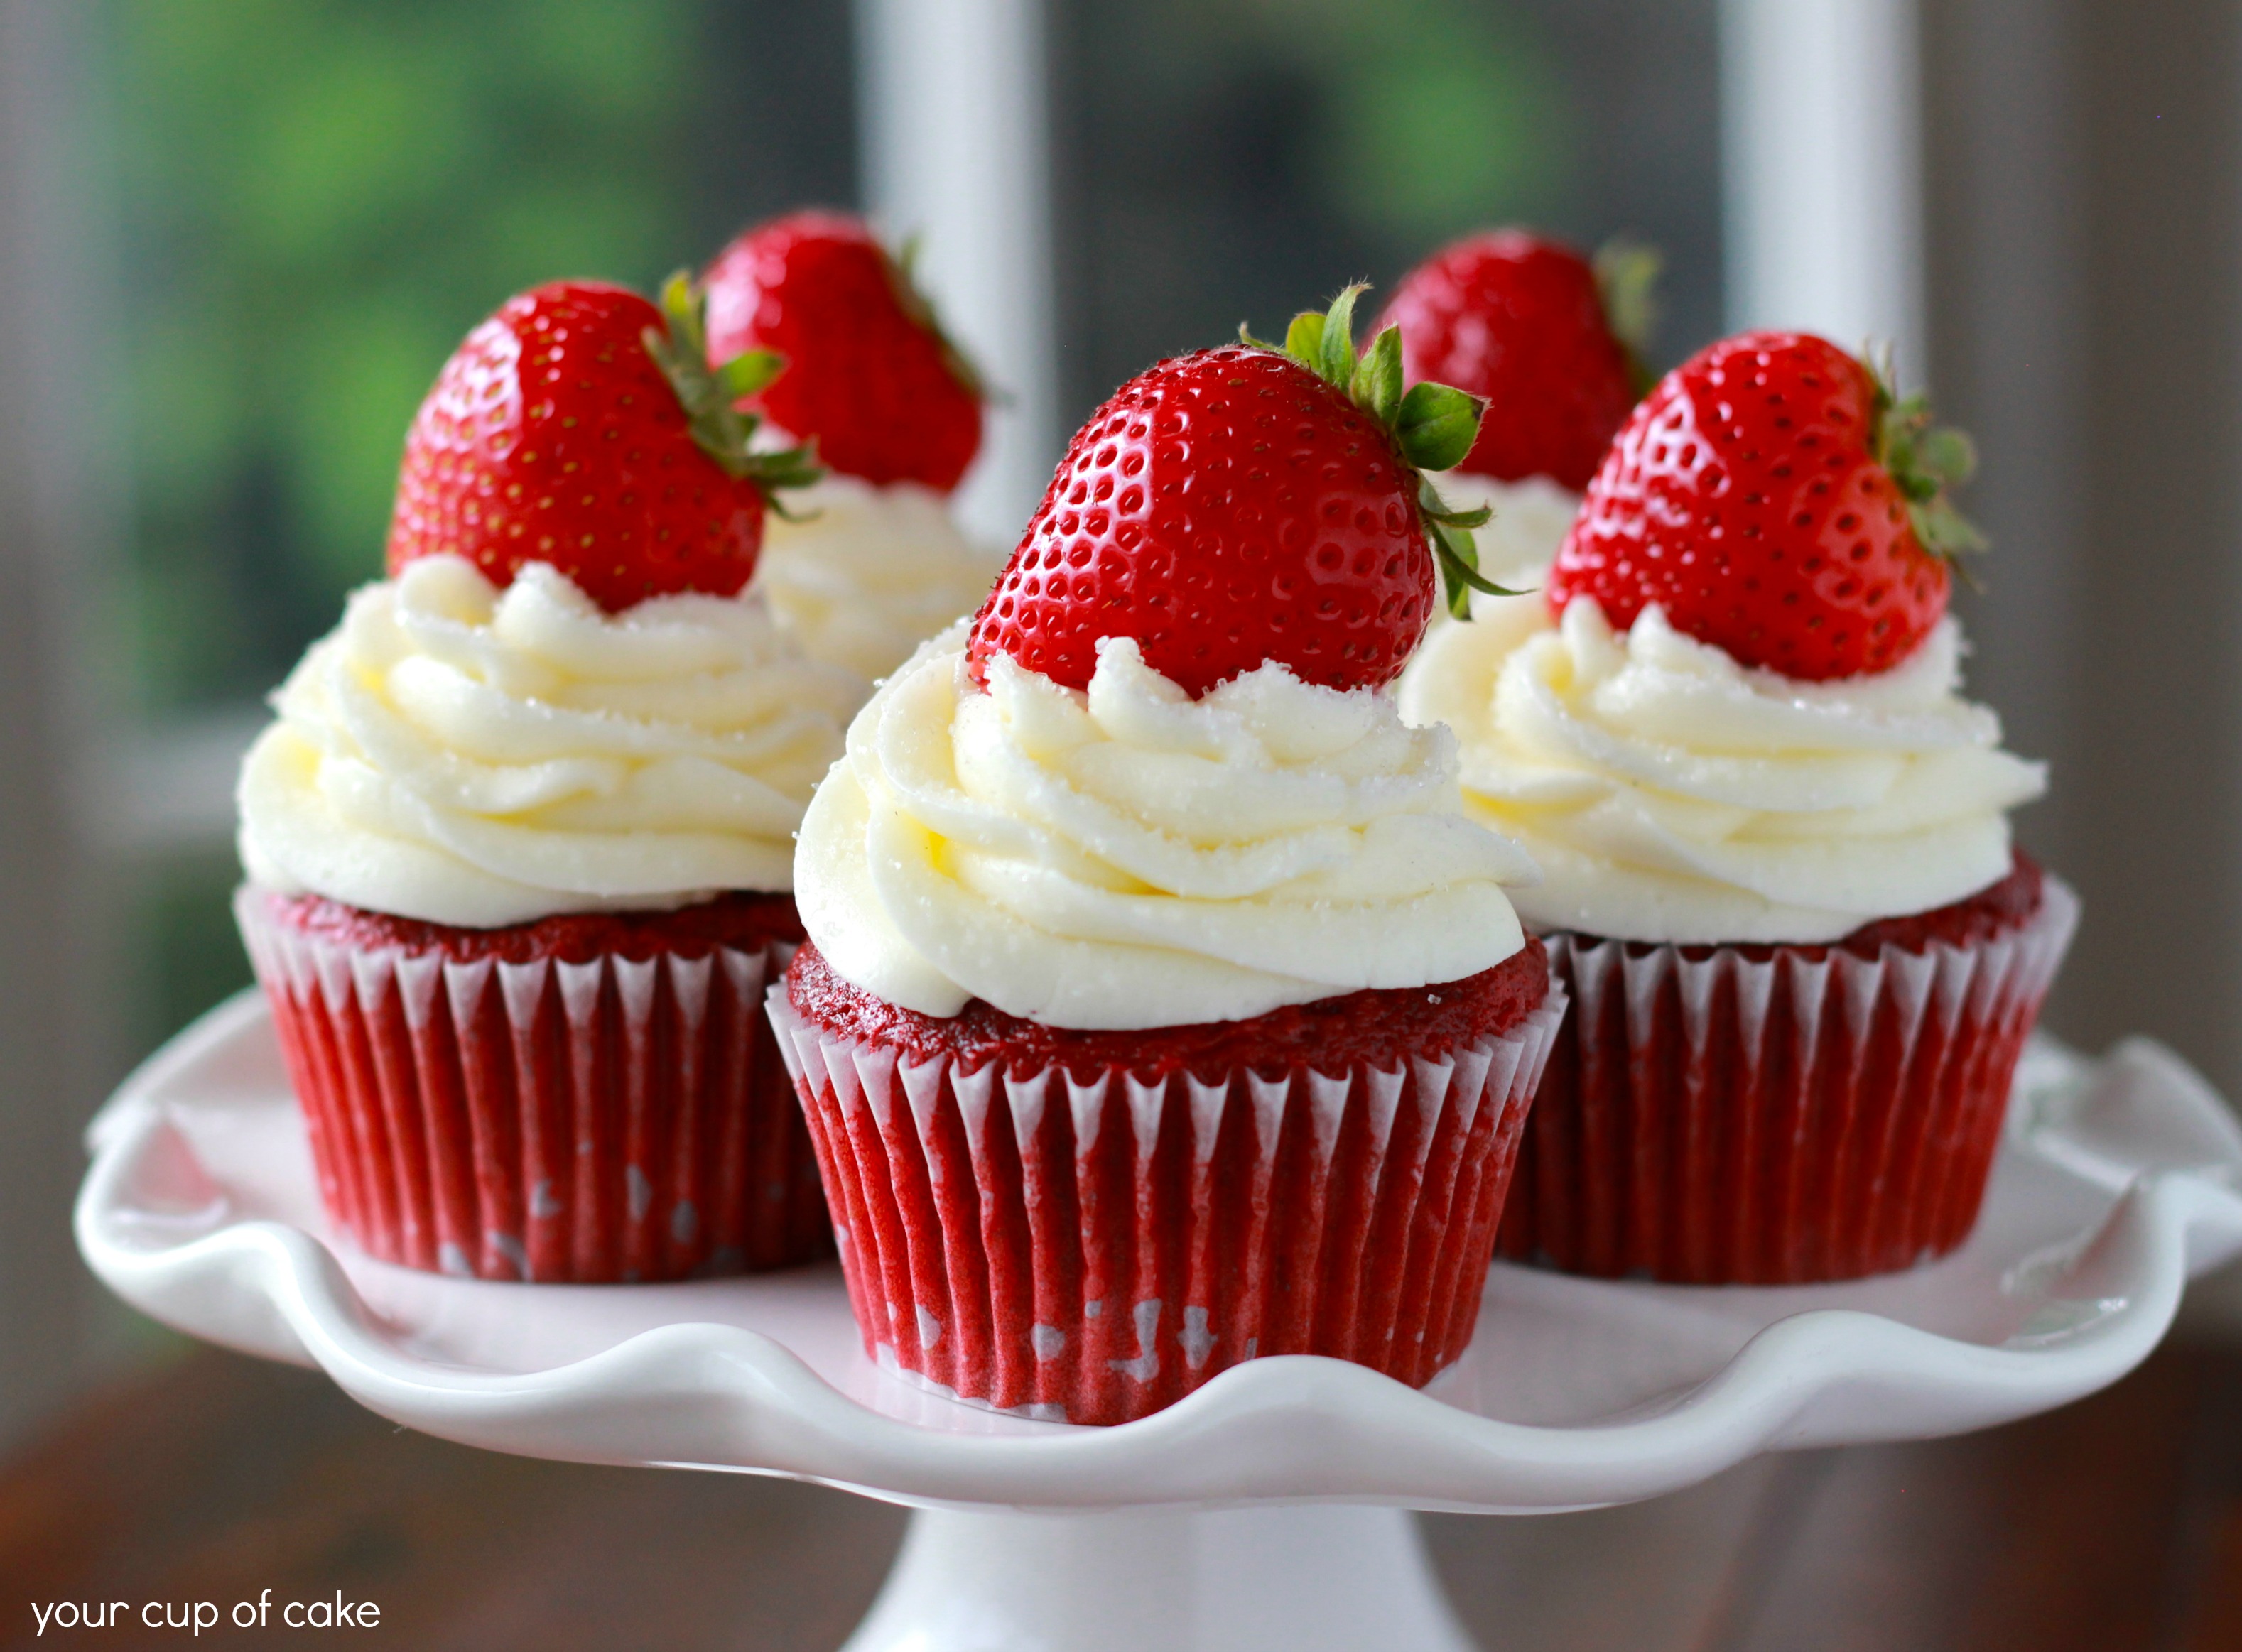 http://www.yourcupofcake.com/wp-content/uploads/2013/08/Strawberry-Red-Velvet-Cupcakes1.jpg